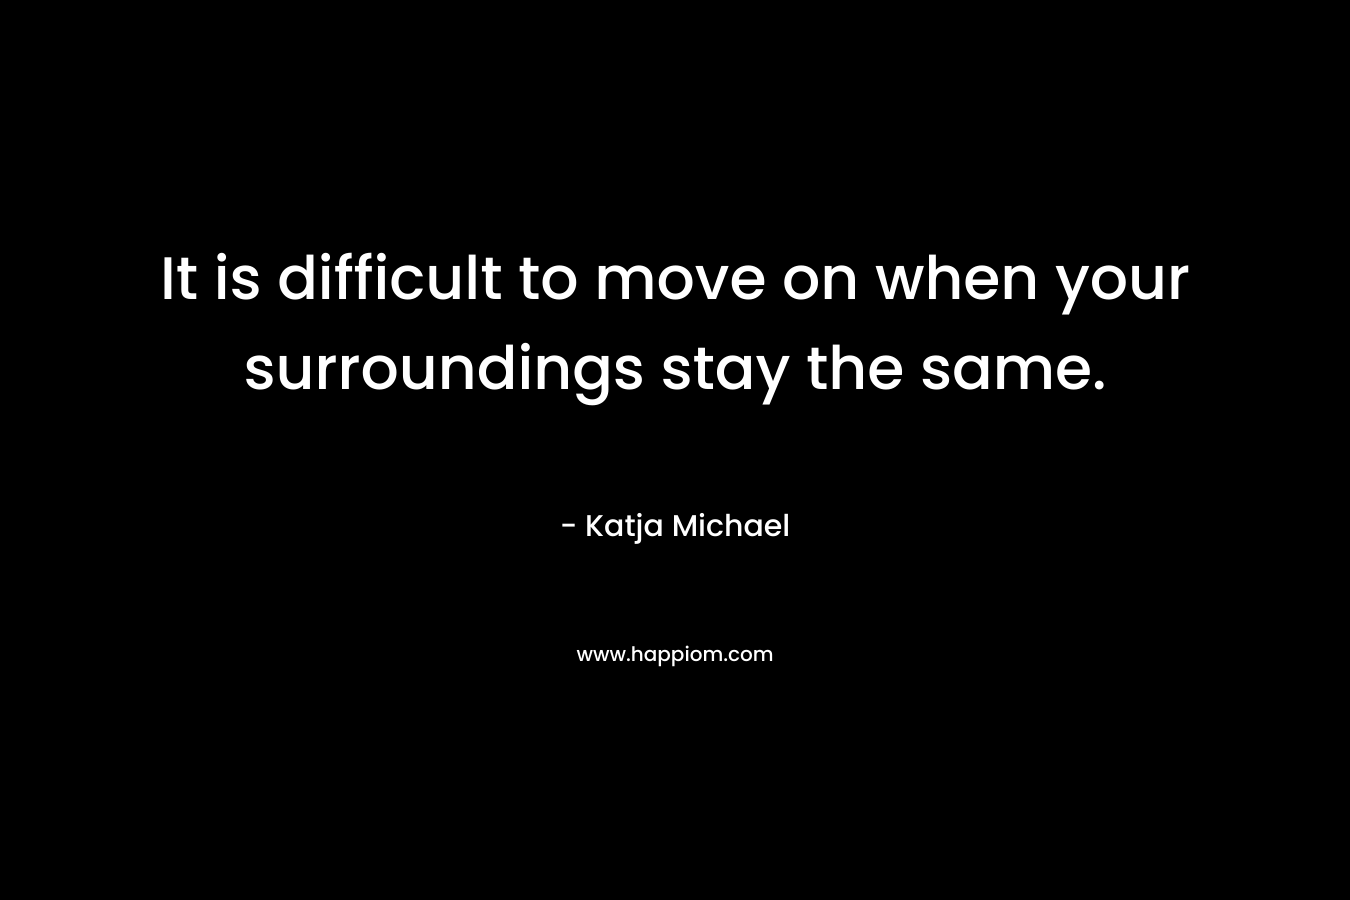 It is difficult to move on when your surroundings stay the same.